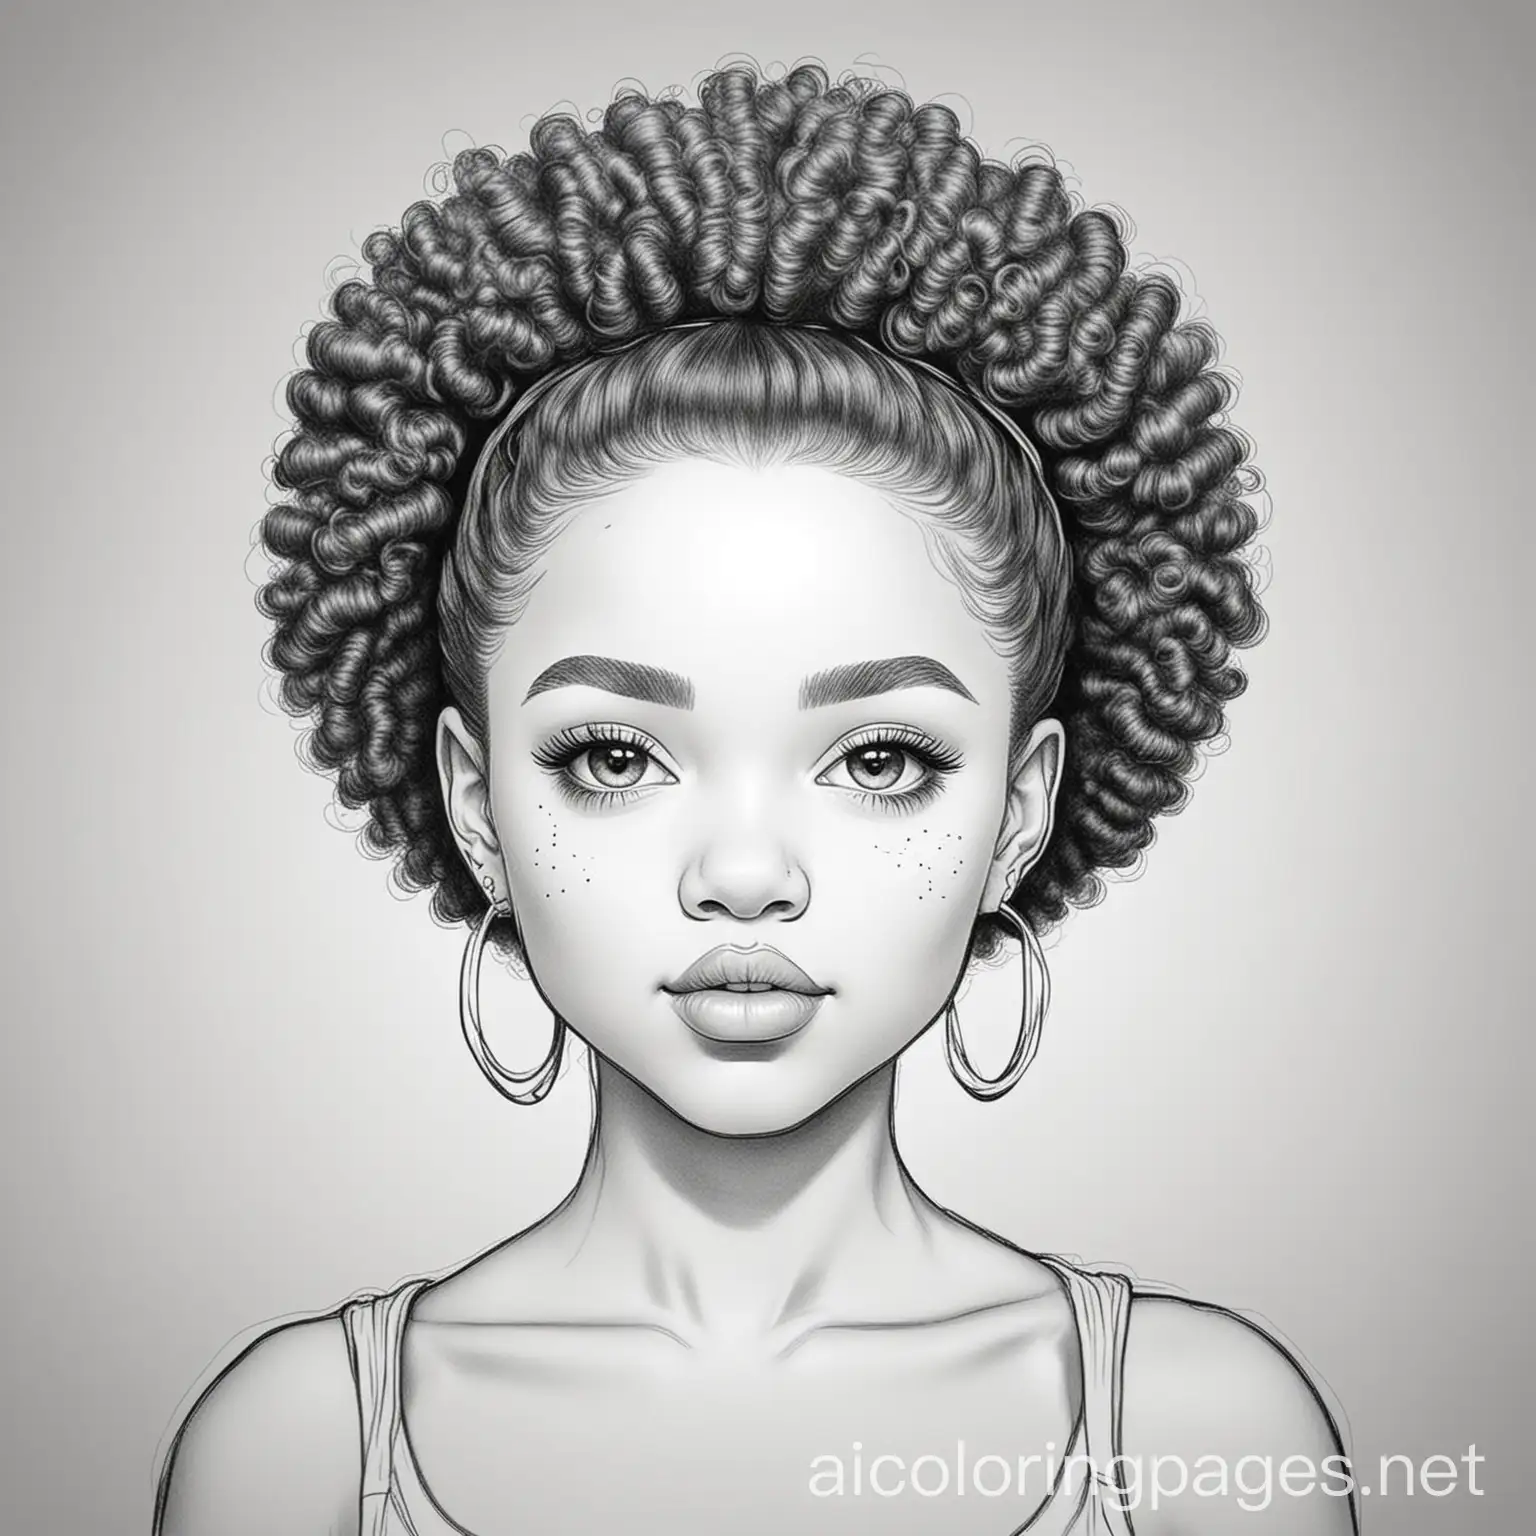 Pretty light skinned Black woman with afro puffs and baby hair, Coloring Page, black and white, line art, white background, Simplicity, Ample White Space. The background of the coloring page is plain white to make it easy for young children to color within the lines. The outlines of all the subjects are easy to distinguish, making it simple for kids to color without too much difficulty, Coloring Page, black and white, line art, white background, Simplicity, Ample White Space. The background of the coloring page is plain white to make it easy for young children to color within the lines. The outlines of all the subjects are easy to distinguish, making it simple for kids to color without too much difficulty